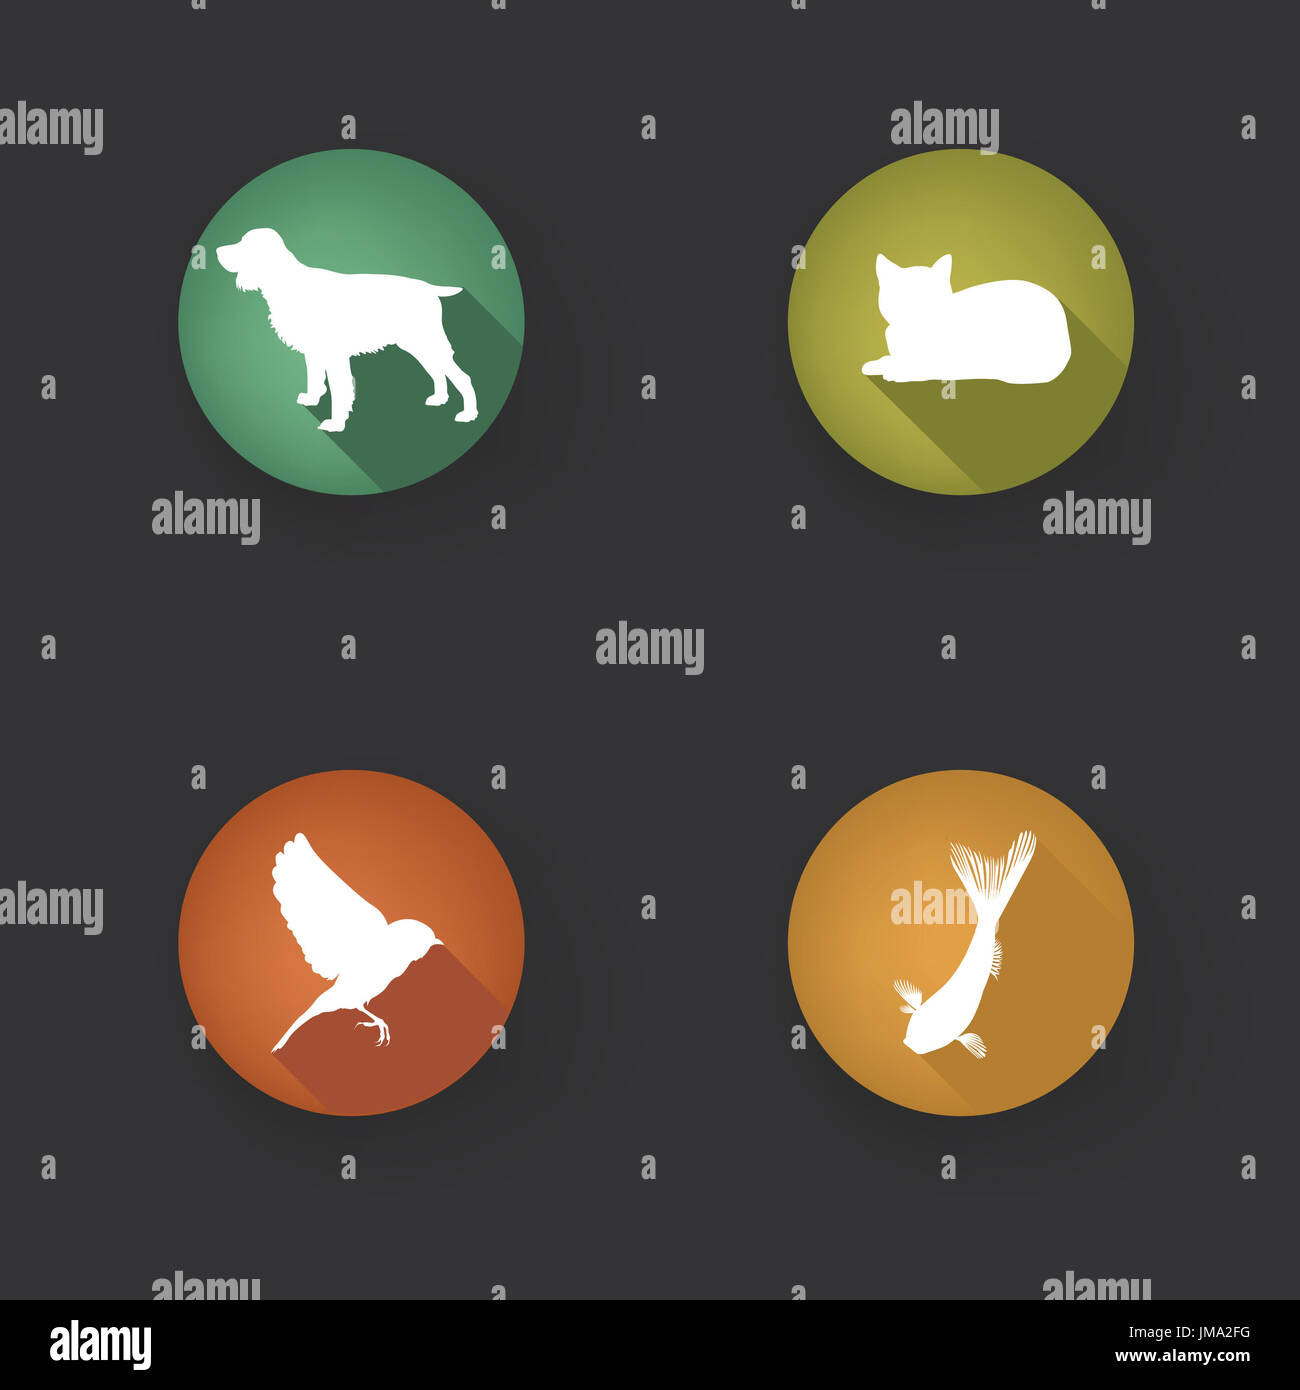 Pet Icons Set. Vet Symbols. Collection of vector pets icon silhouette. Stock Photo